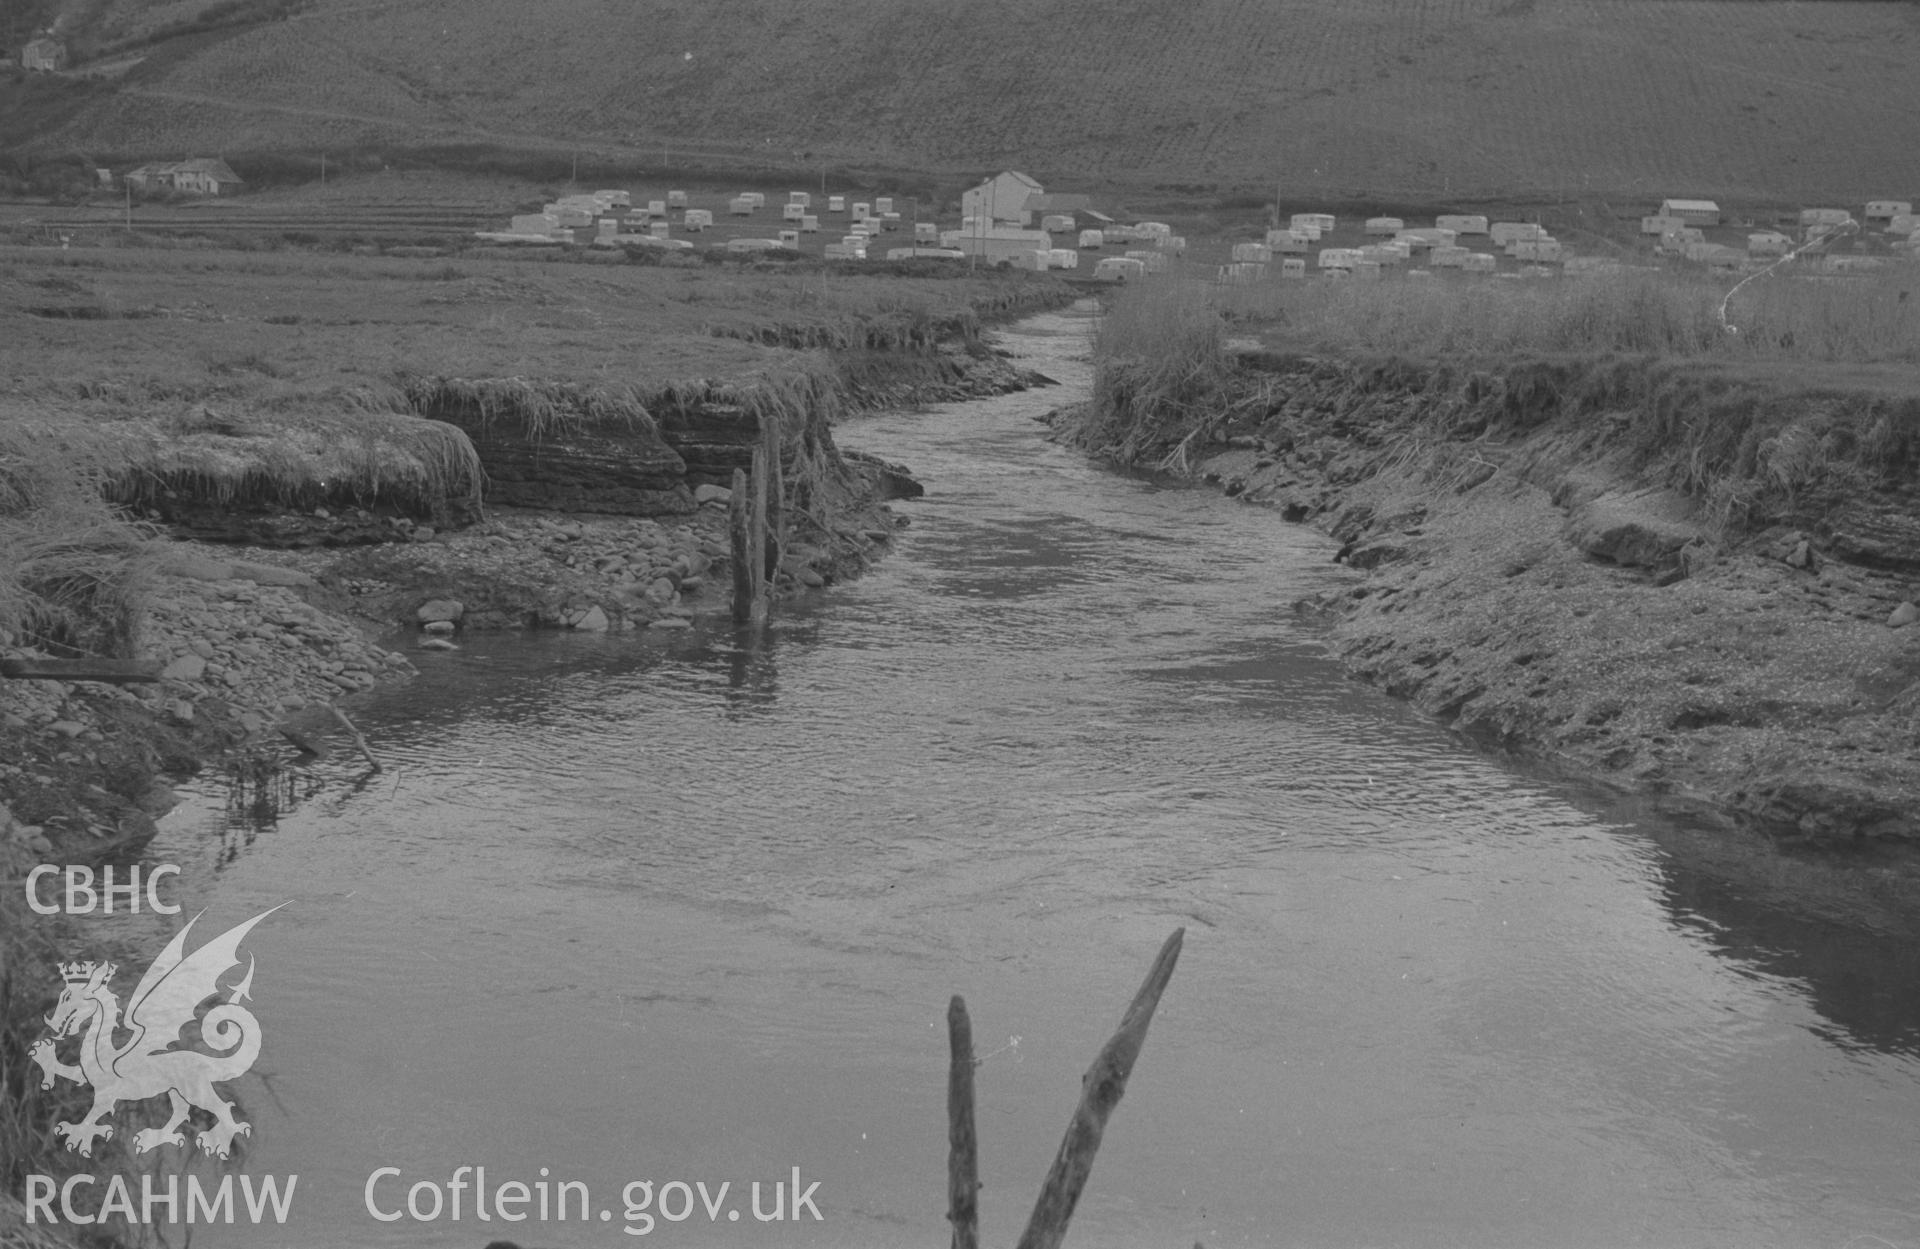 Digital copy of black & white negative showing view up the Clarach from just above the footbridge; Glan-y-Mor-Fach in centre; Ty-Gwyn on left. Photographed by Arthur O. Chater on 25th December 1964 from Grid Ref SN 5873 8401, looking south south east.